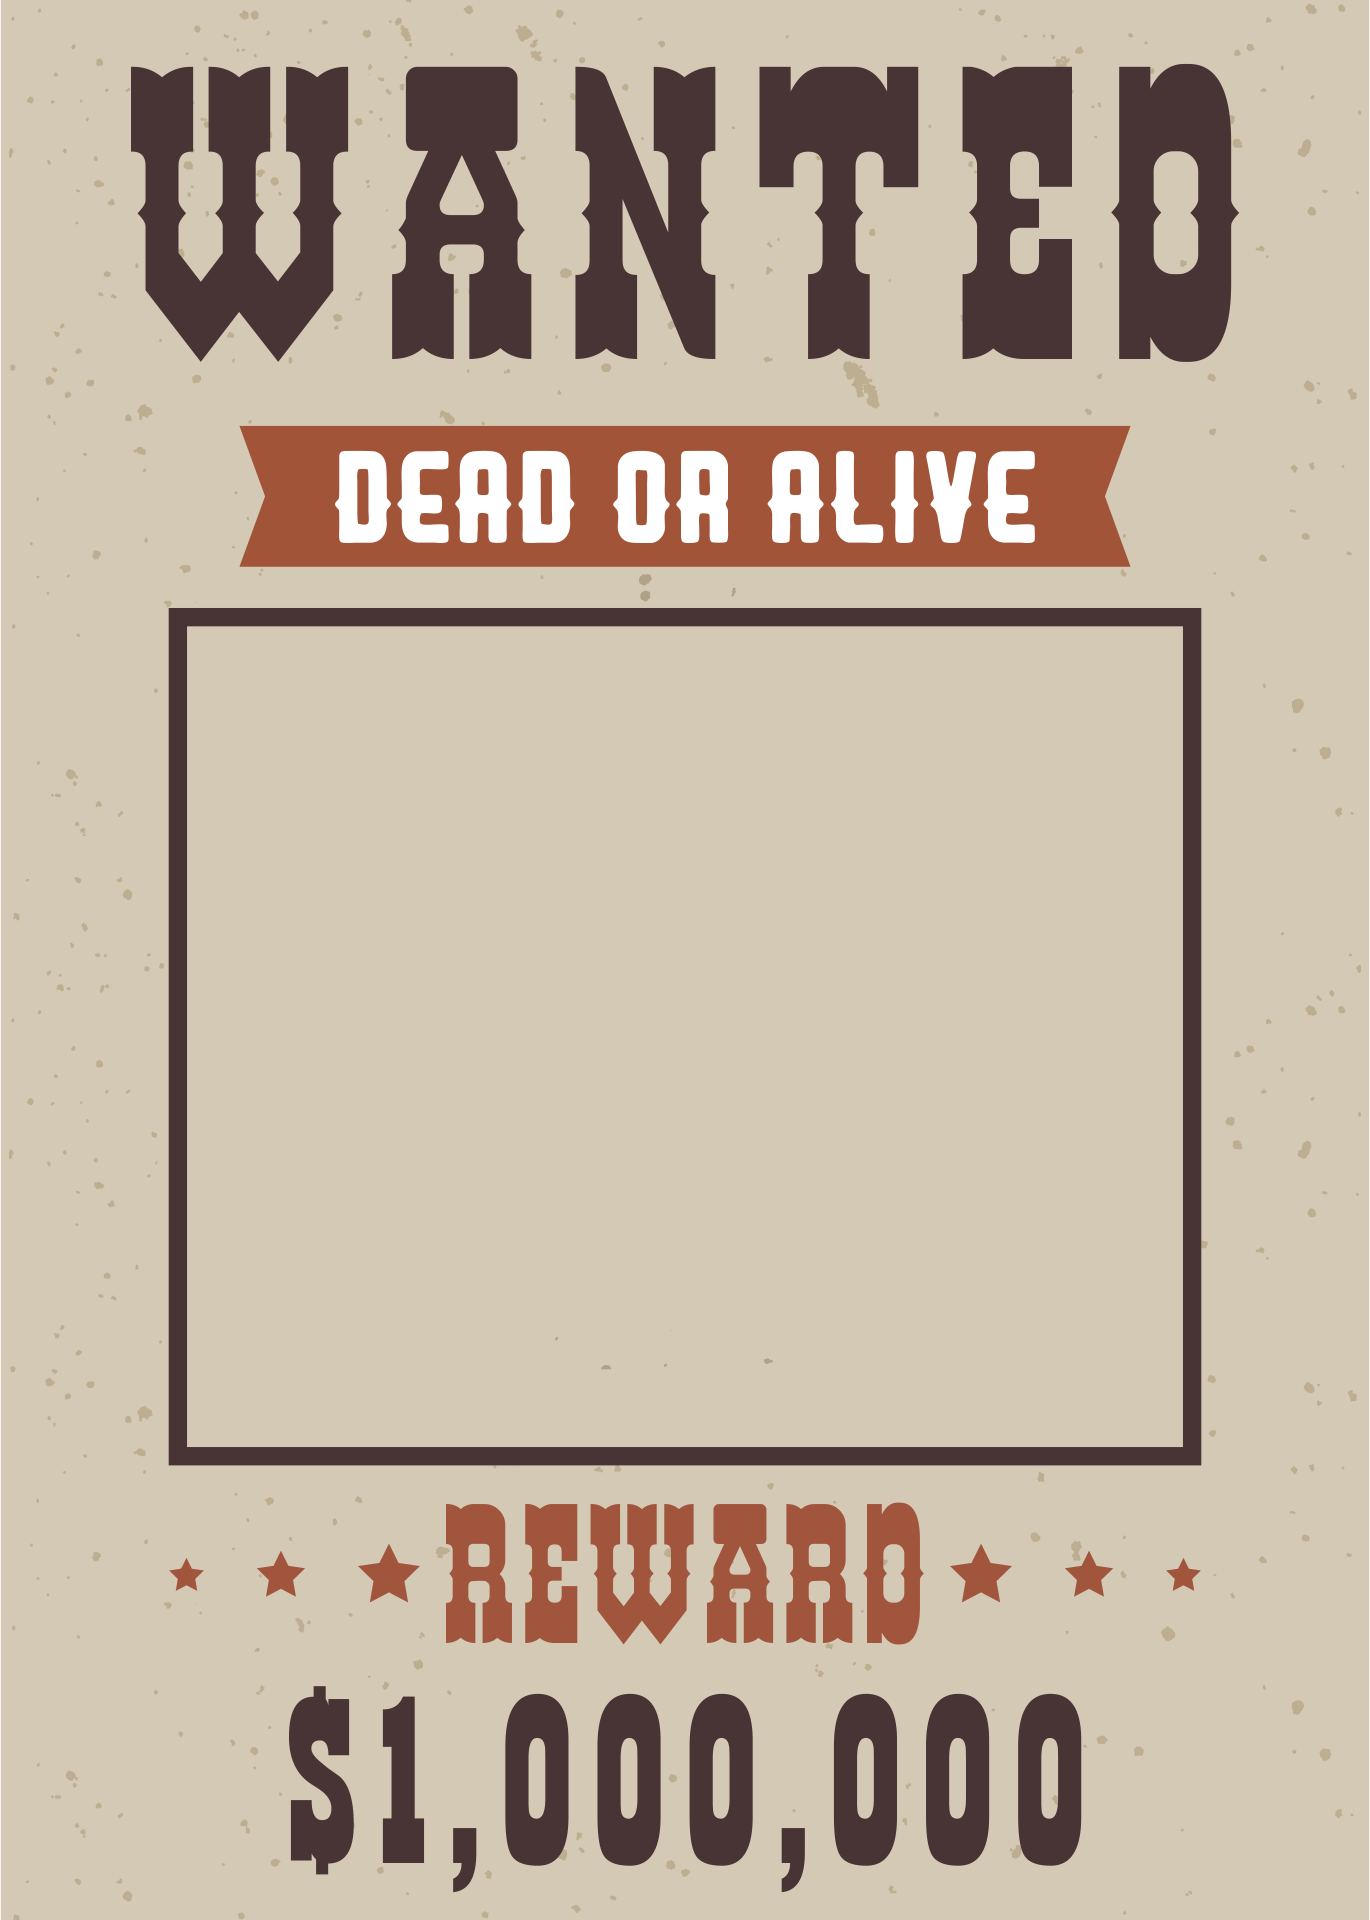 Wild West Wanted Sign Template